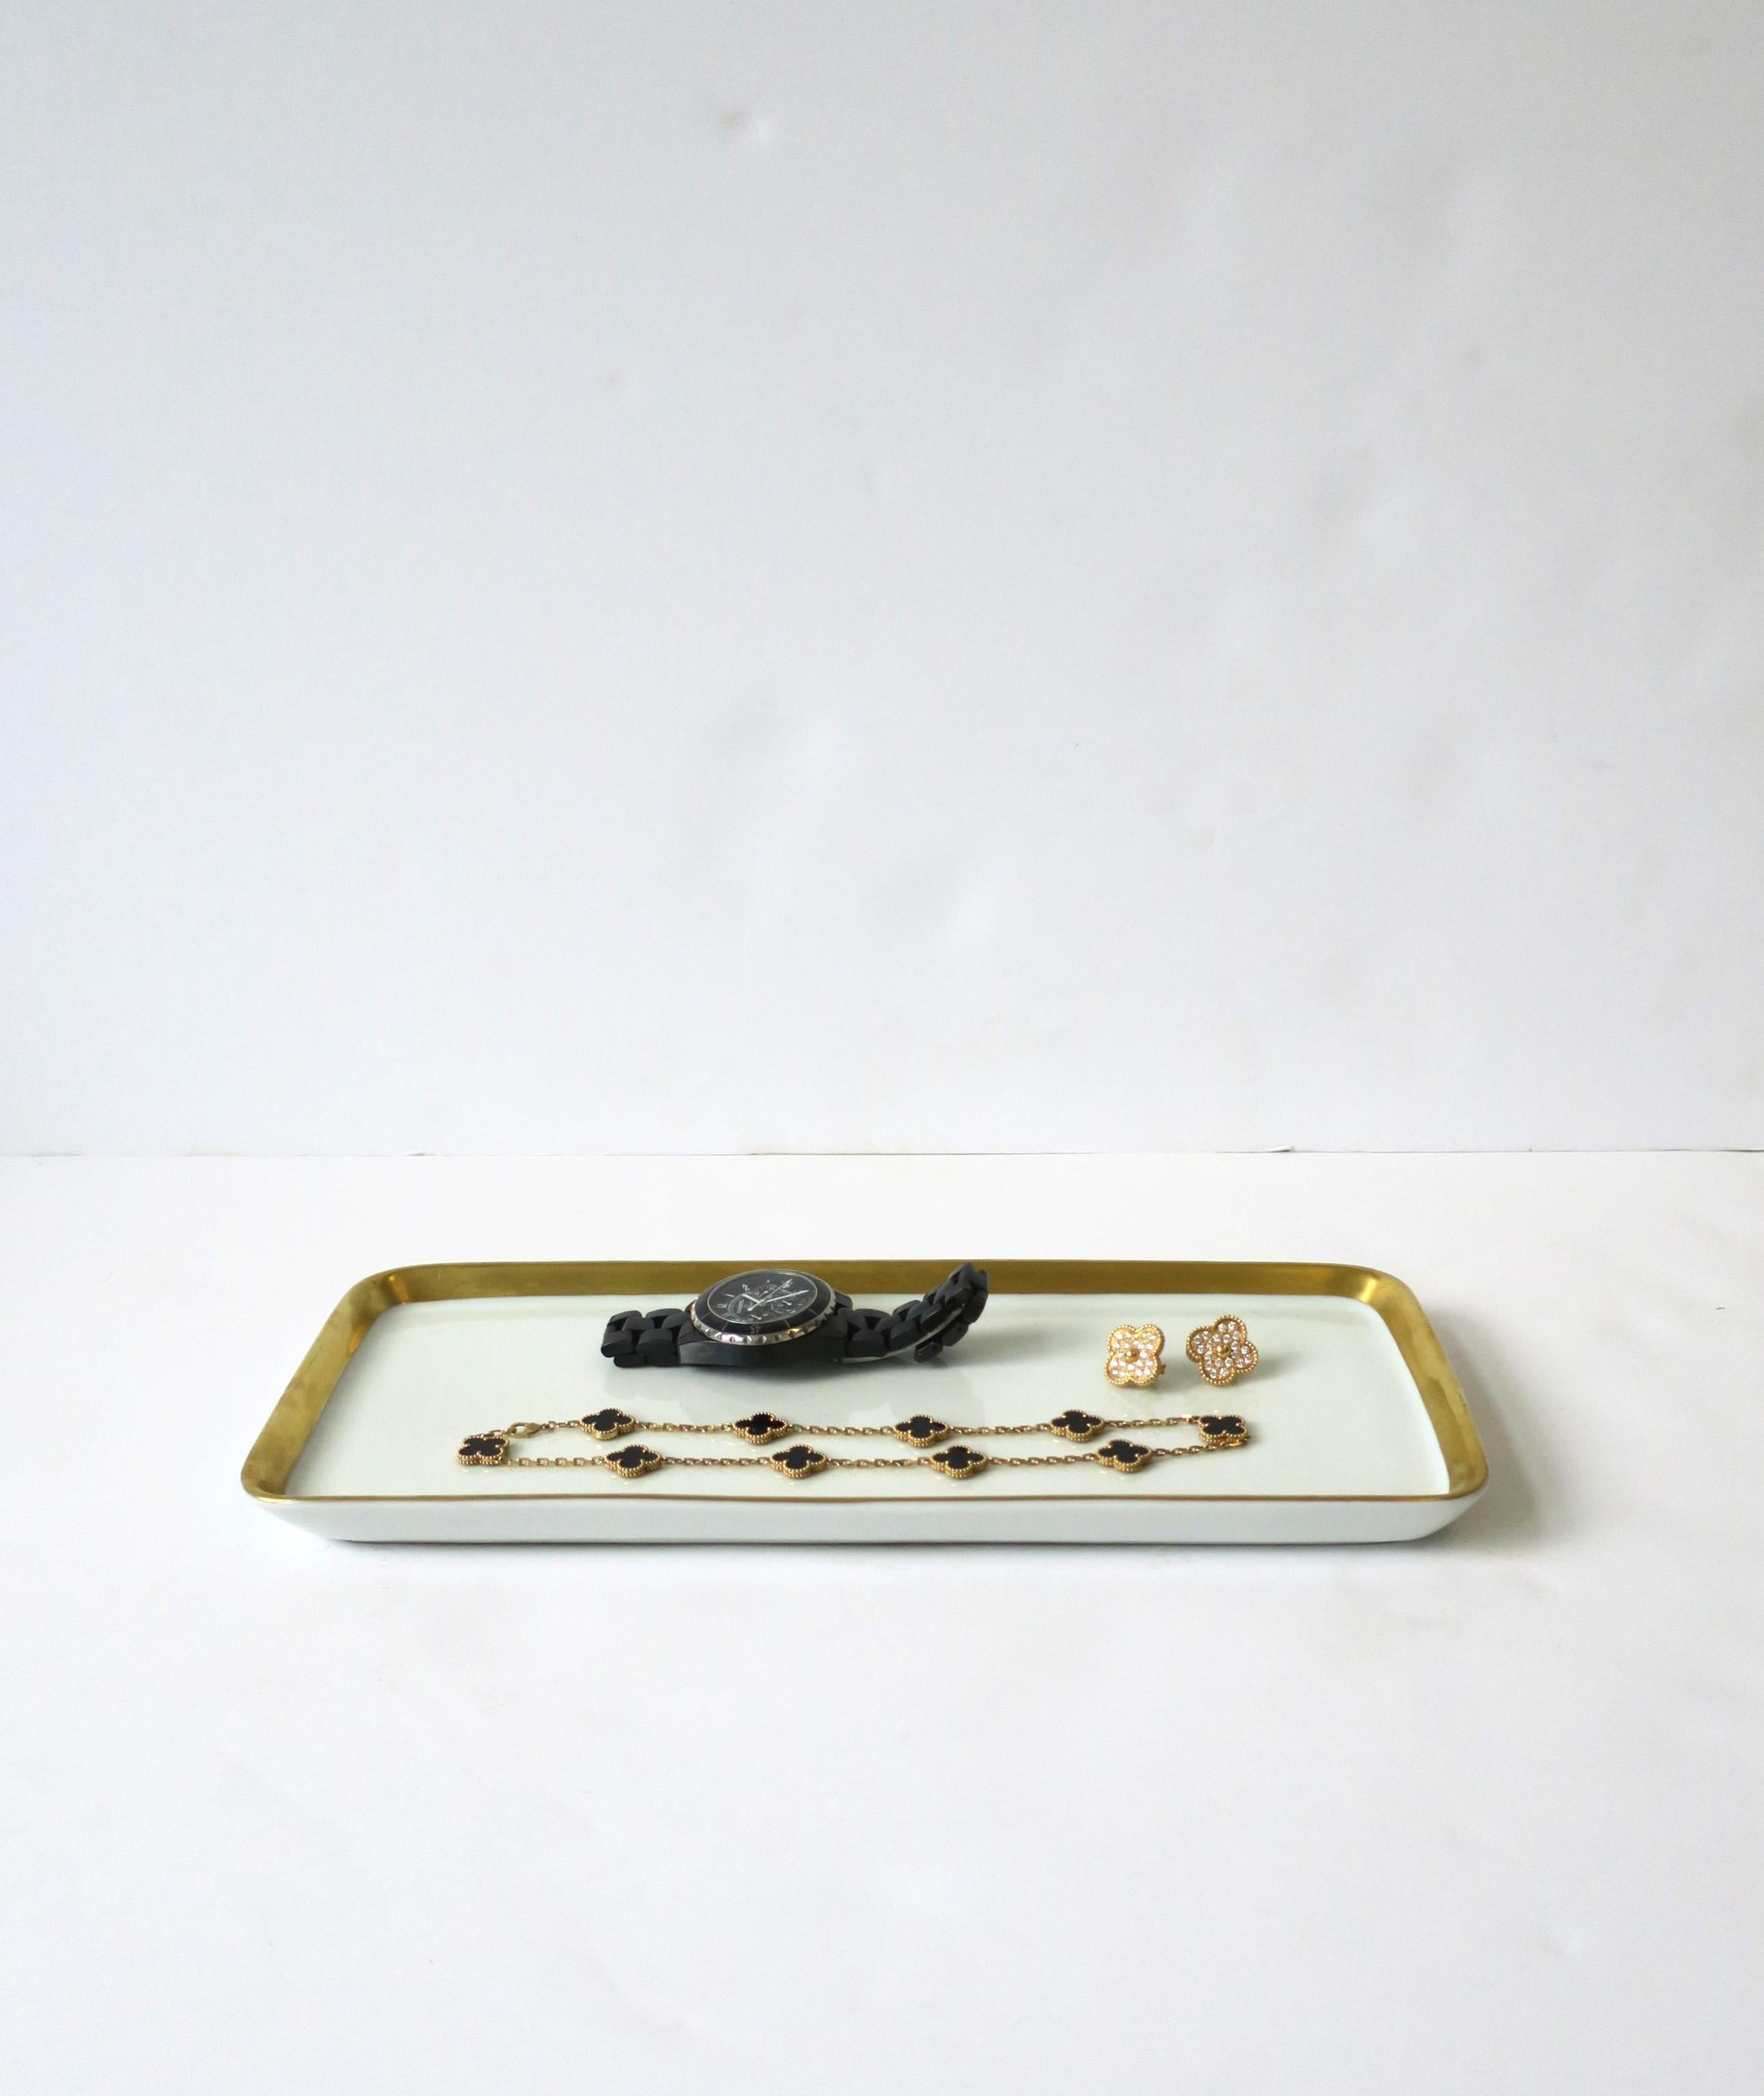 White Porcelain and Gold Serving Tray by Rosenthal Kurfurstendamm Berlin In Good Condition For Sale In New York, NY